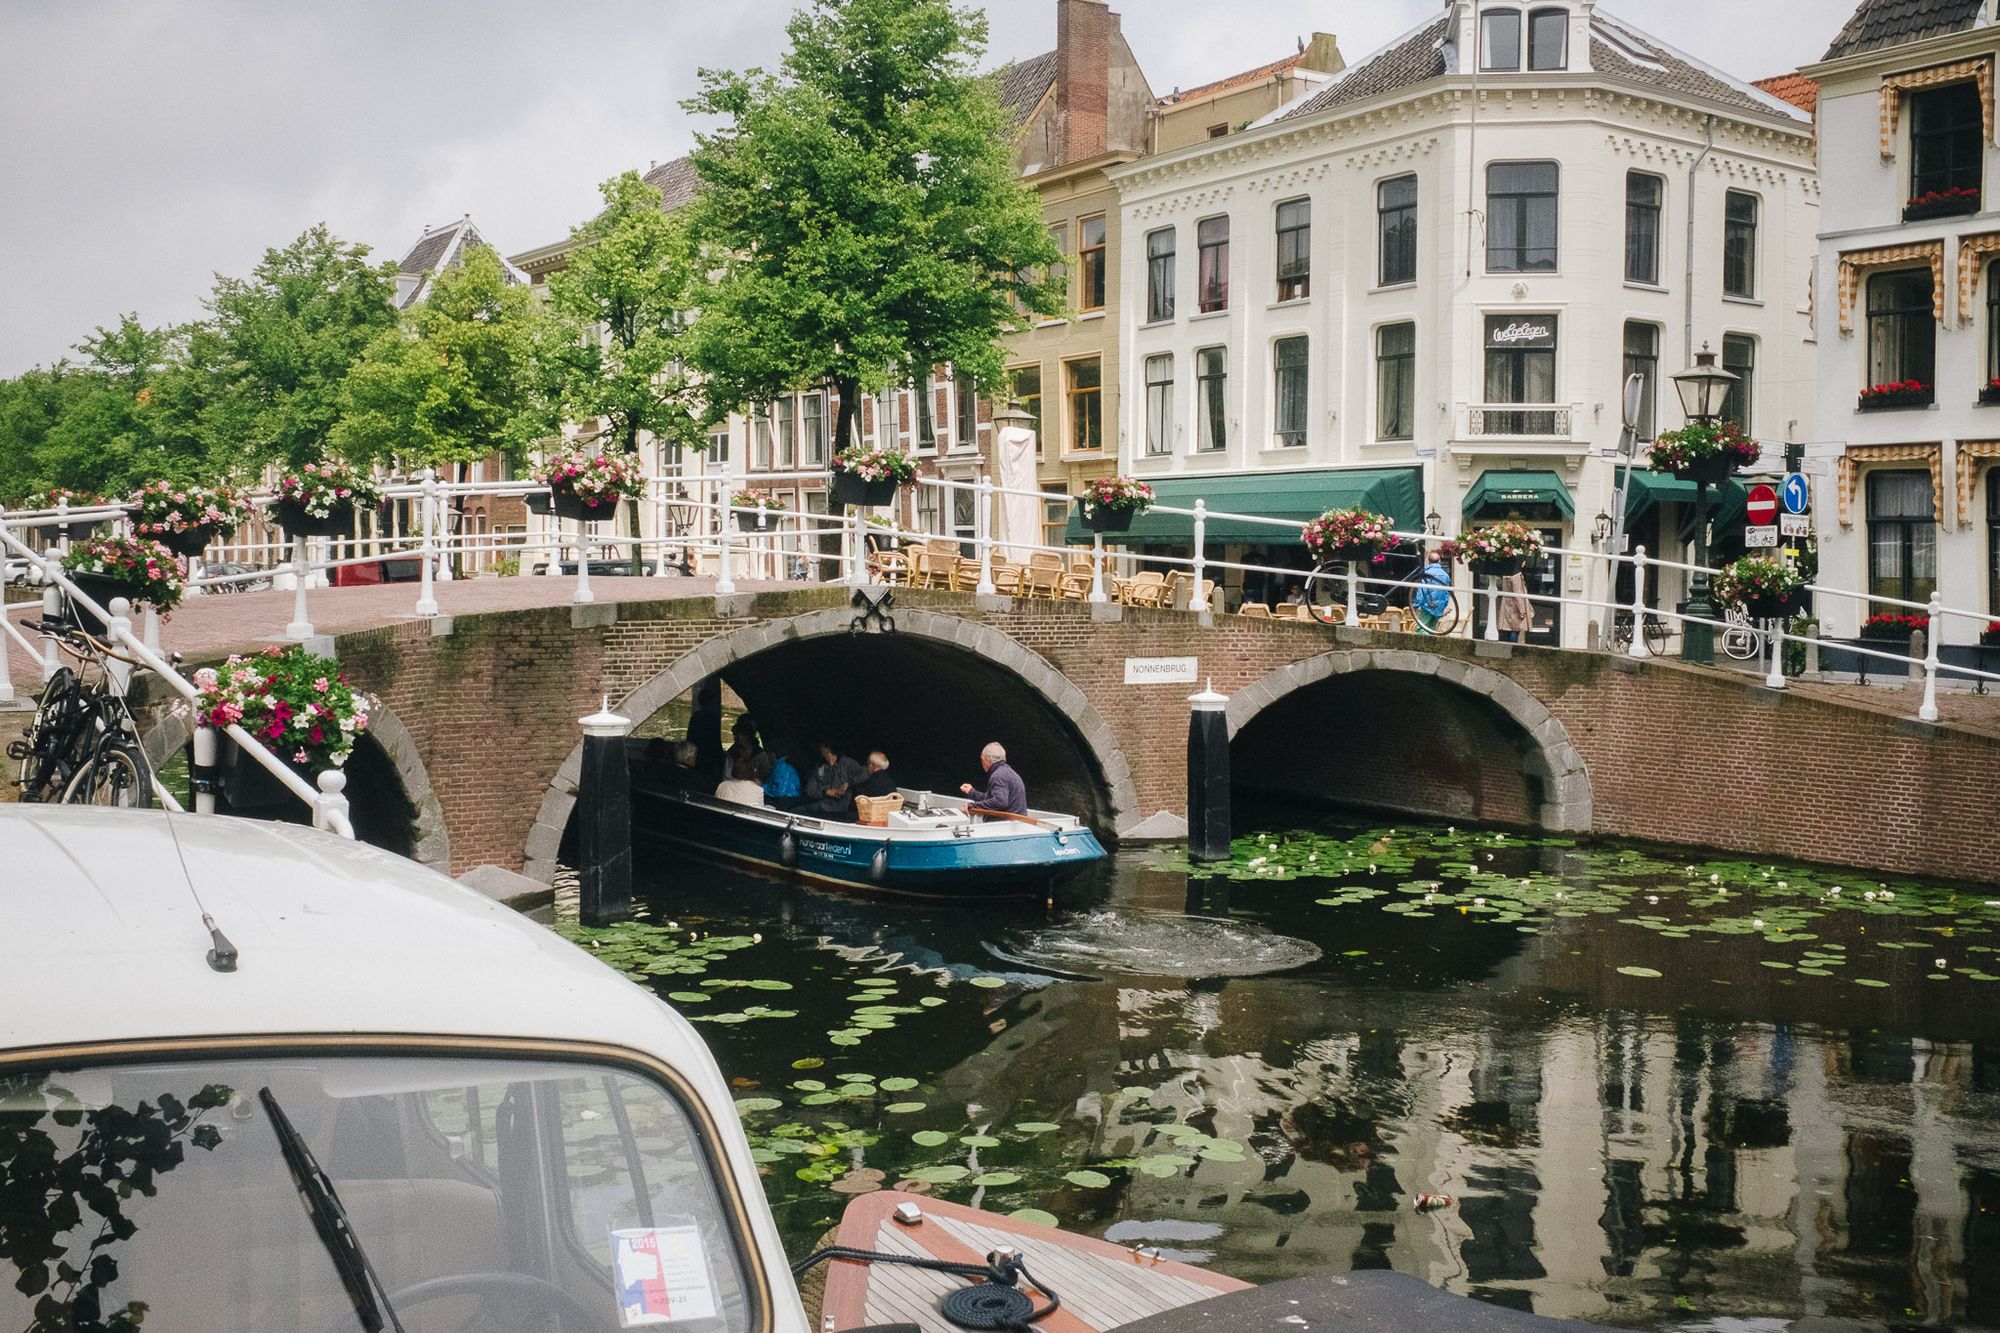 Boats travelling along a canal in Leiden during summer.